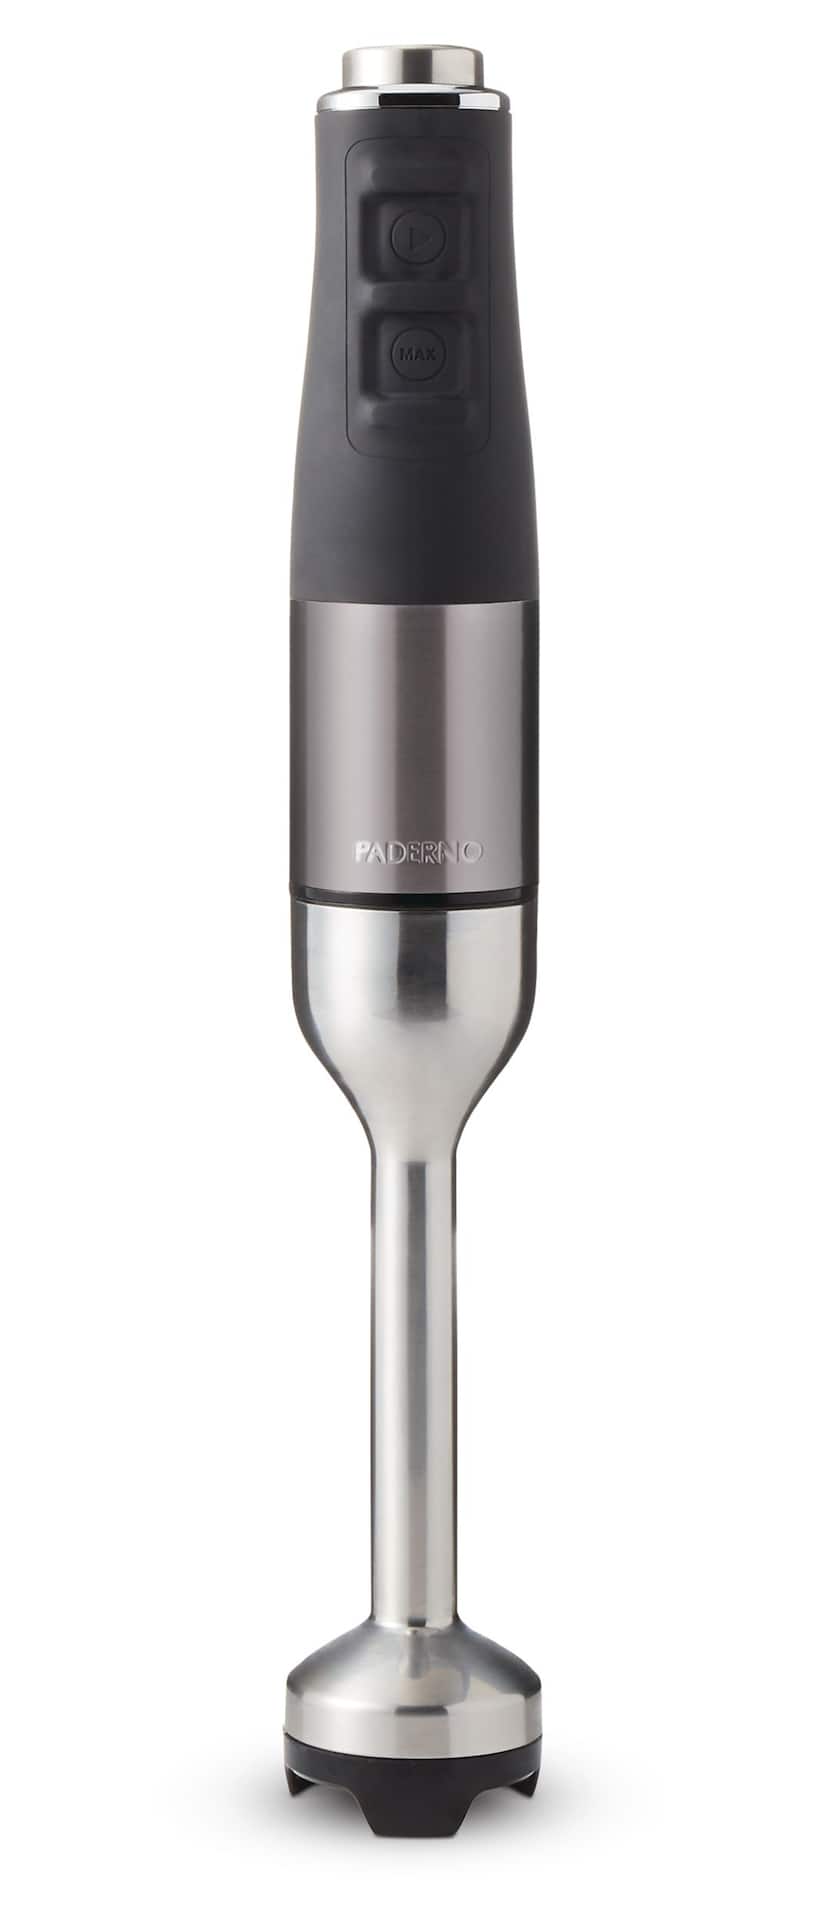 https://media-www.canadiantire.ca/product/living/kitchen/kitchen-appliances/0435270/paderno-variable-spd-immersion-blender-blk-stainless-steel-0a50bbb9-dcca-4176-b8b3-e063957fcc72-jpgrendition.jpg